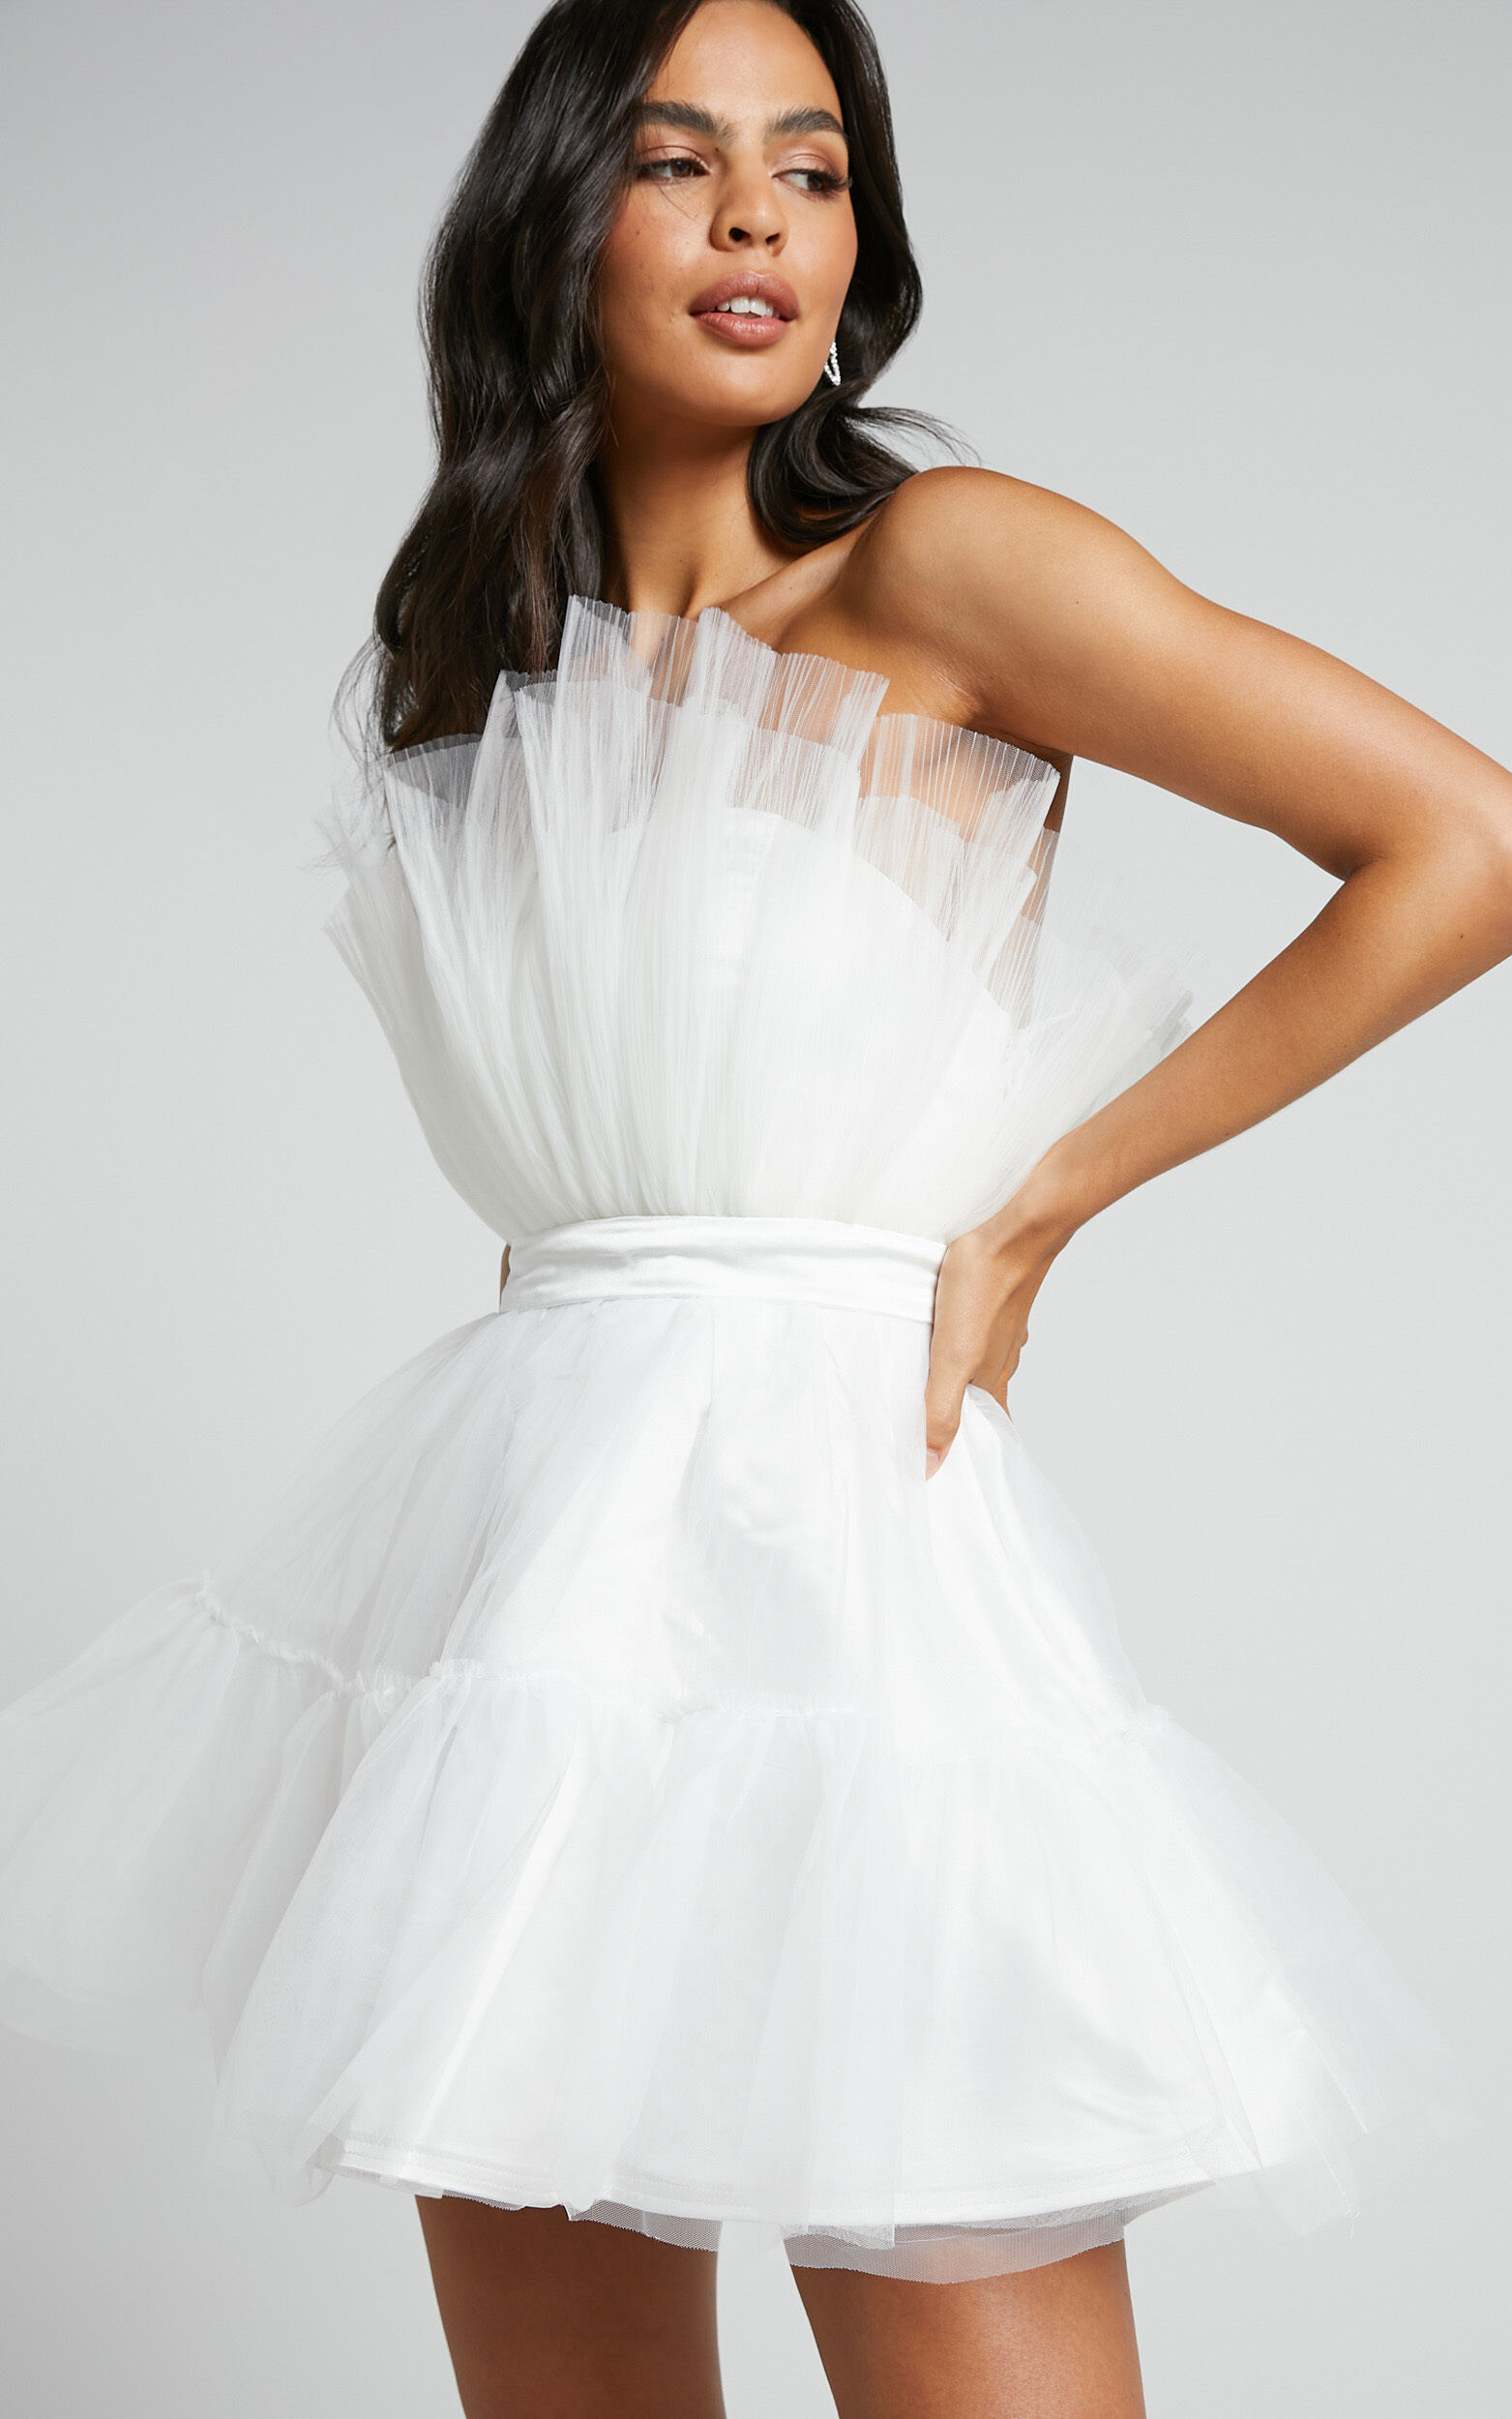 Amalya Mini Dress - Tiered Tulle Fit and Flare Dress in White - 04, WHT1